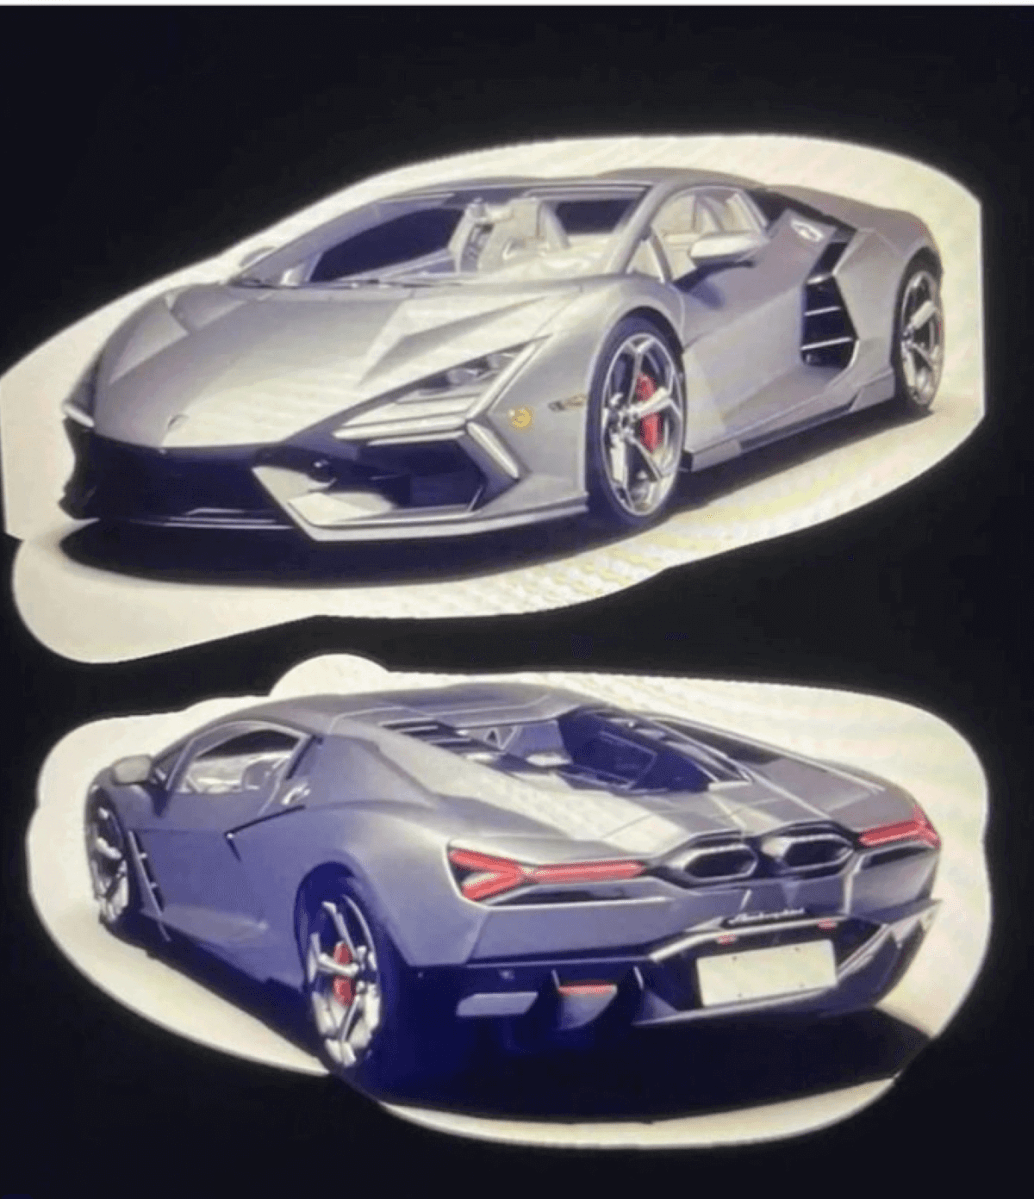 An uncovered digital rendering of the new Aventador replacement